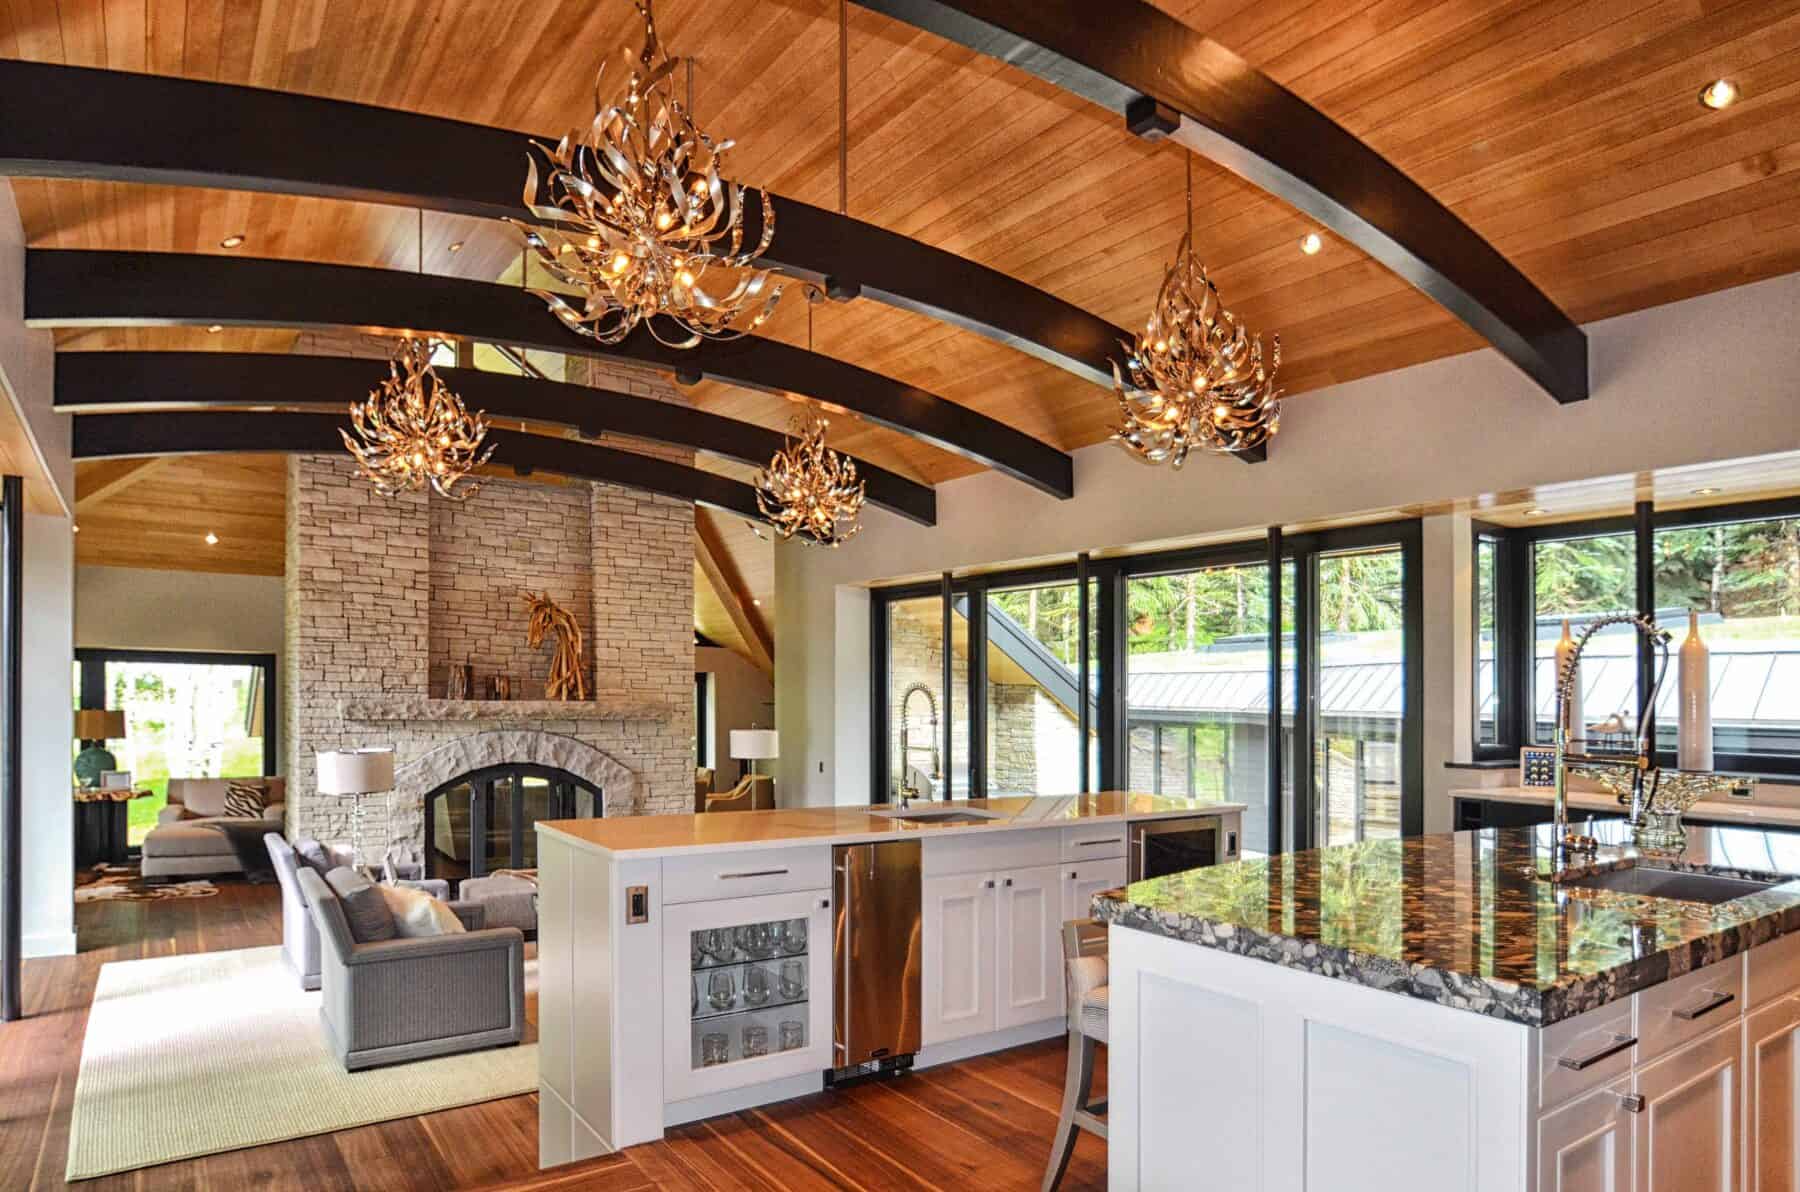 Exquisite Custom Hand Painted Maple Kitchen Cabinets and Black Curved Black Ceiling Beams by Commercial Builder & General Contractor Structural Enterprises